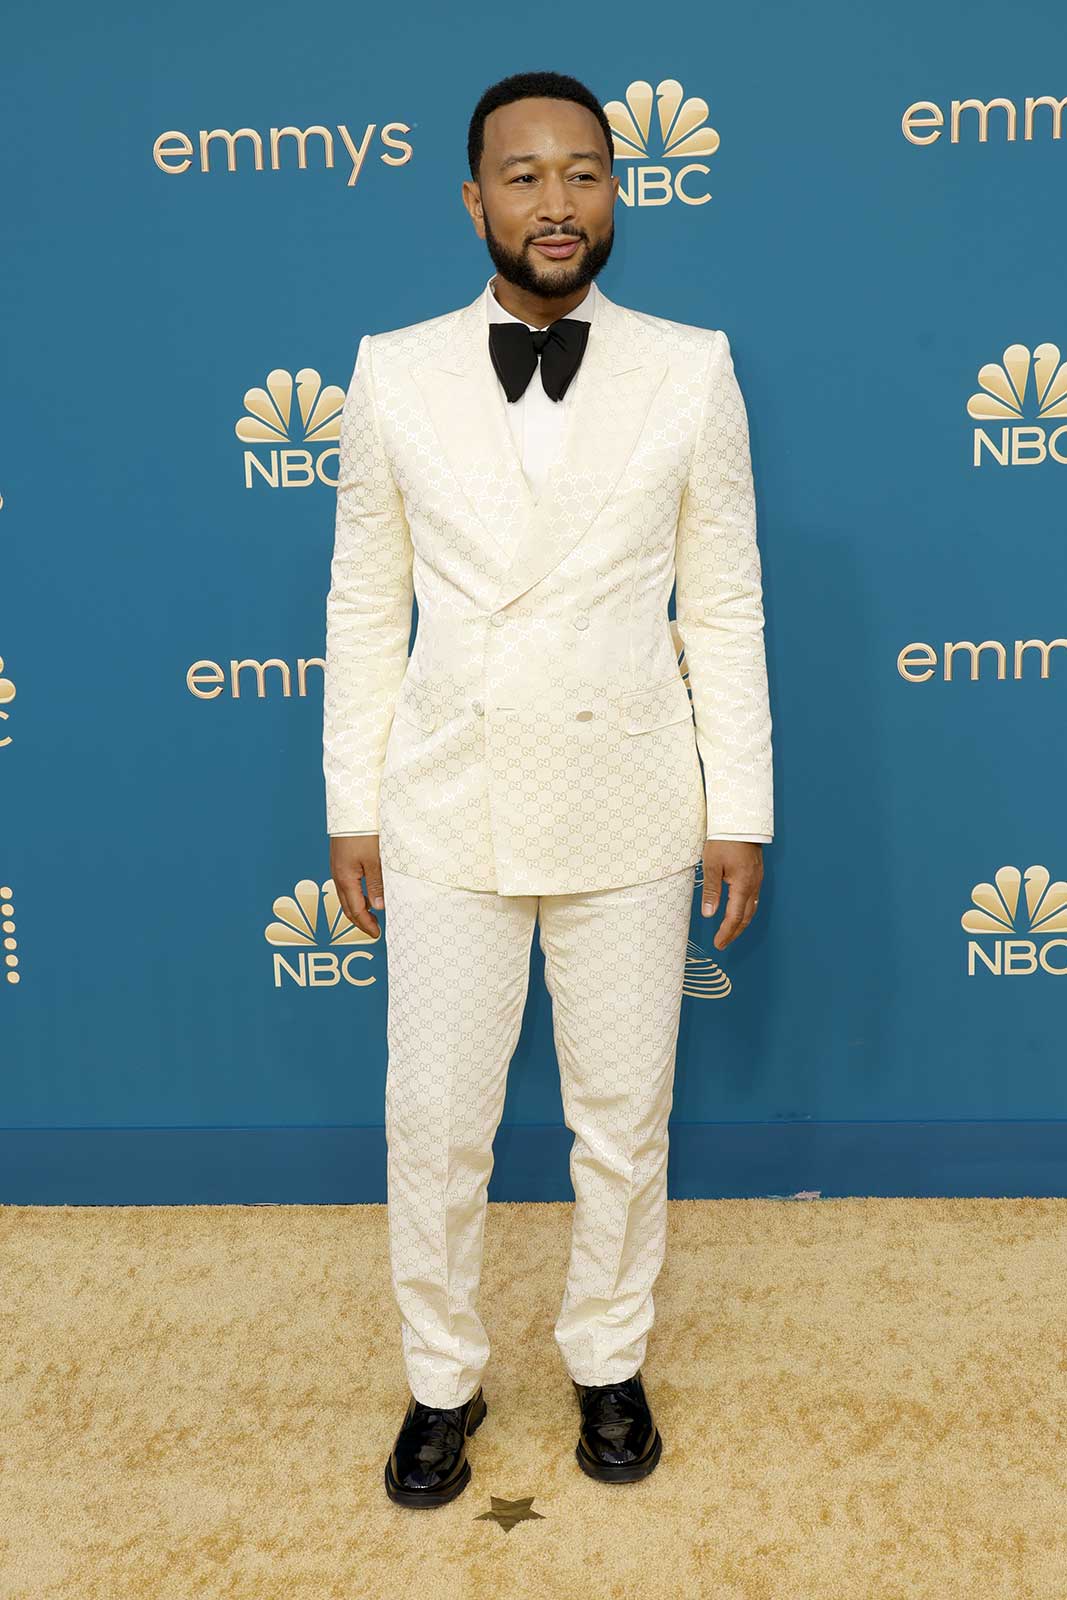 emmys-2022-best-dressed-outfits-red-carpet-190